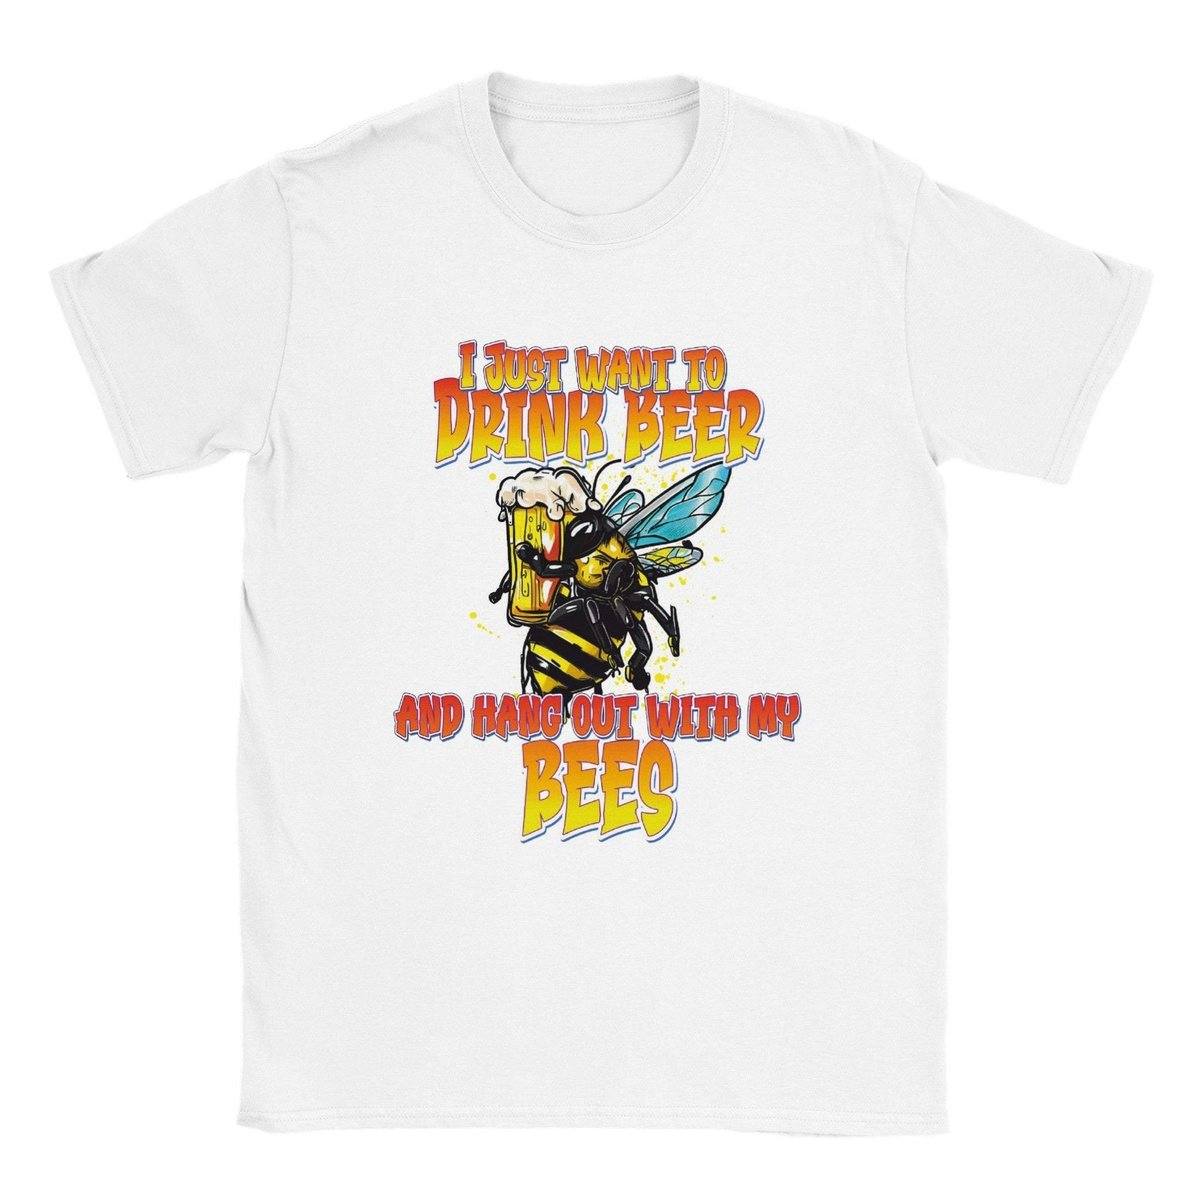 I just want to drink beer and hang out with my bees - Classic Unisex Crewneck T-shirt Adults T-Shirts Unisex White / S Bee Clothing Australia